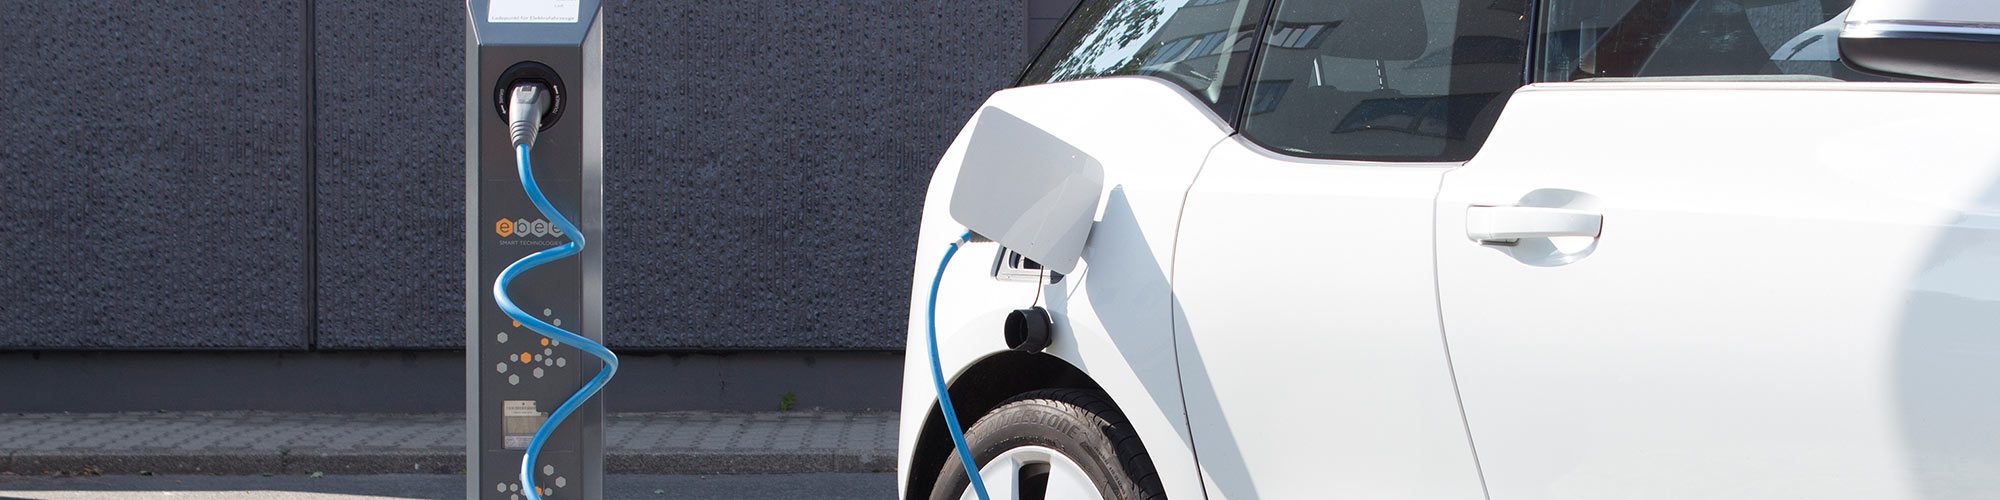 Using the charging technology for electric vehicles safely